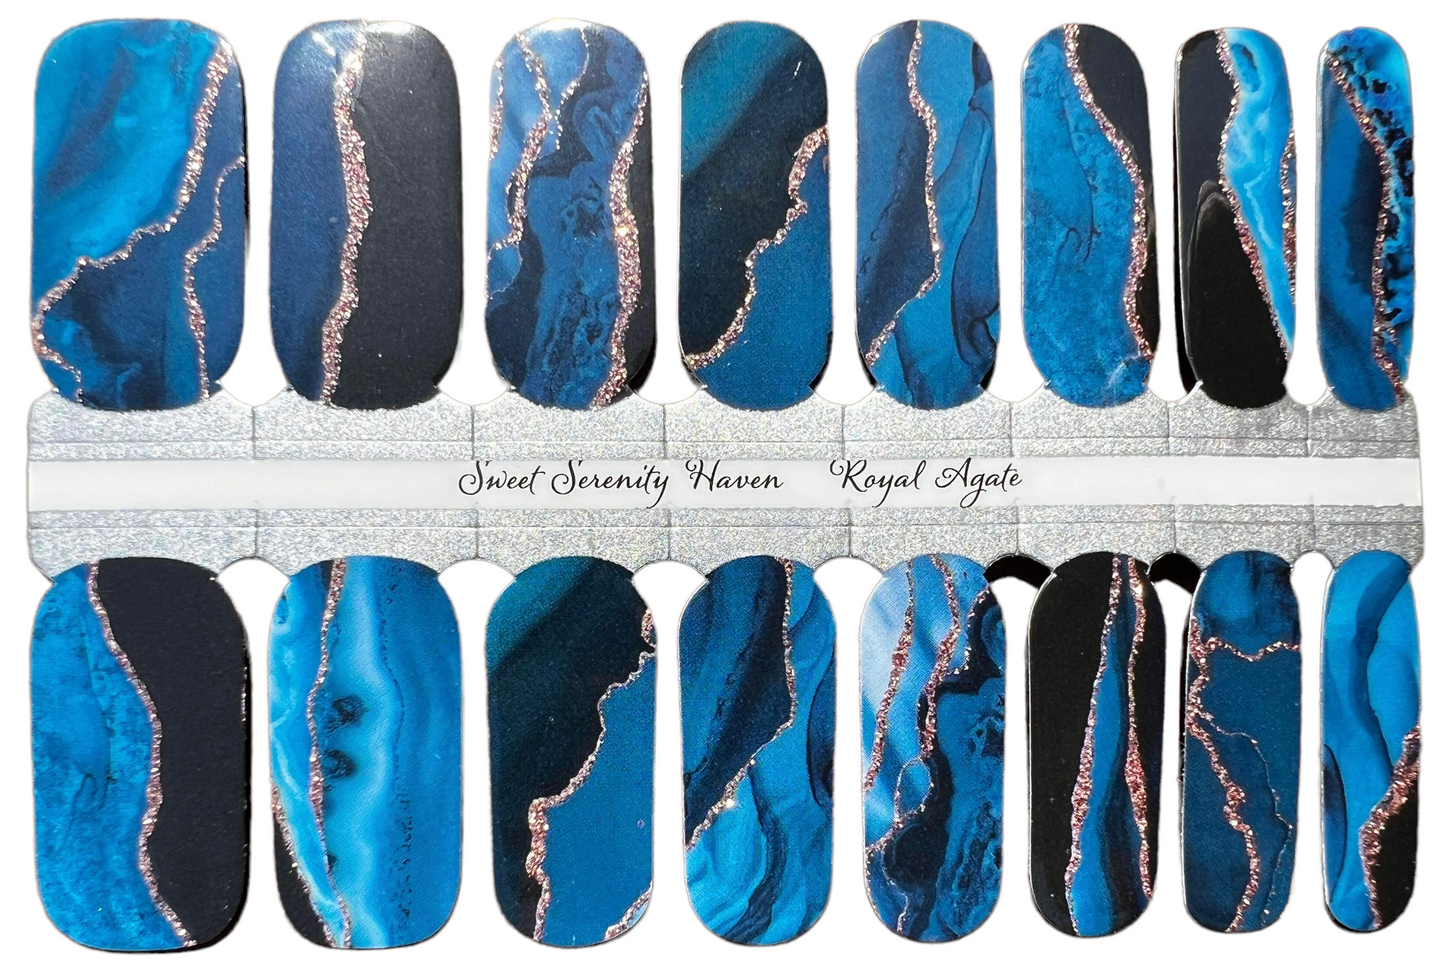 Royal Agate - Exclusive SSH Limited Edition